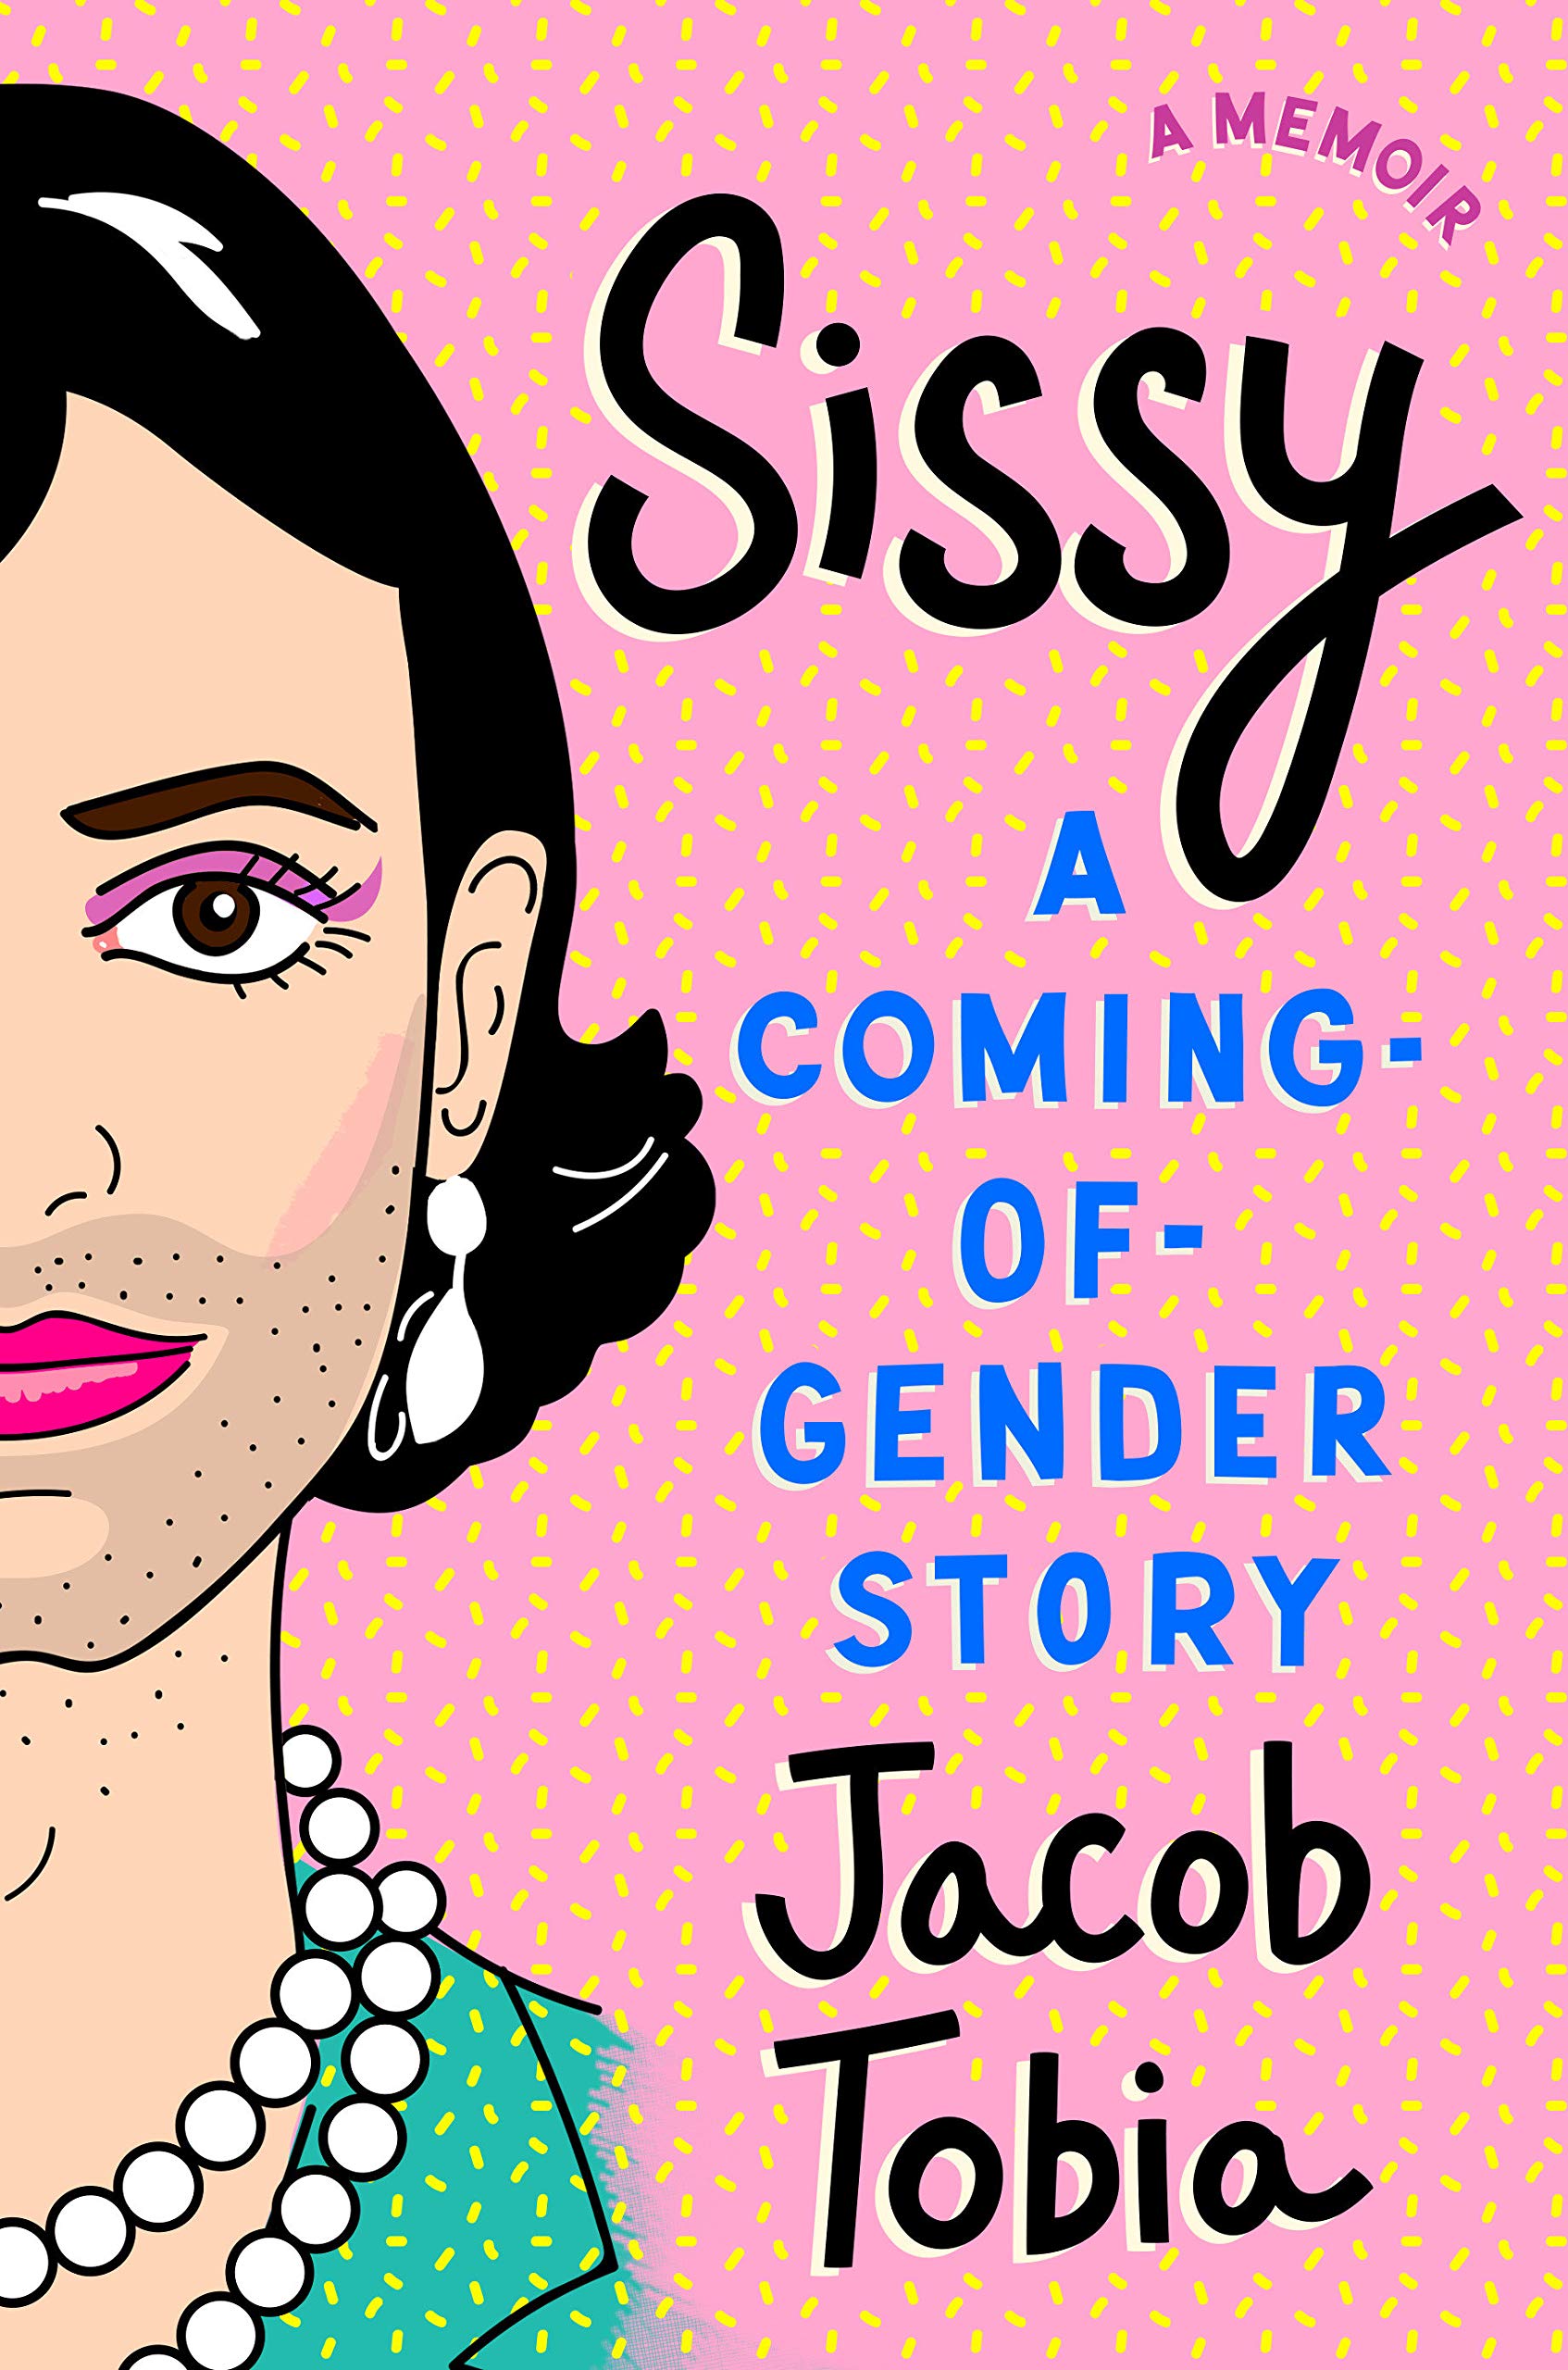 "Sissy: A Coming-of-Gender Story" by Jacob Tobia